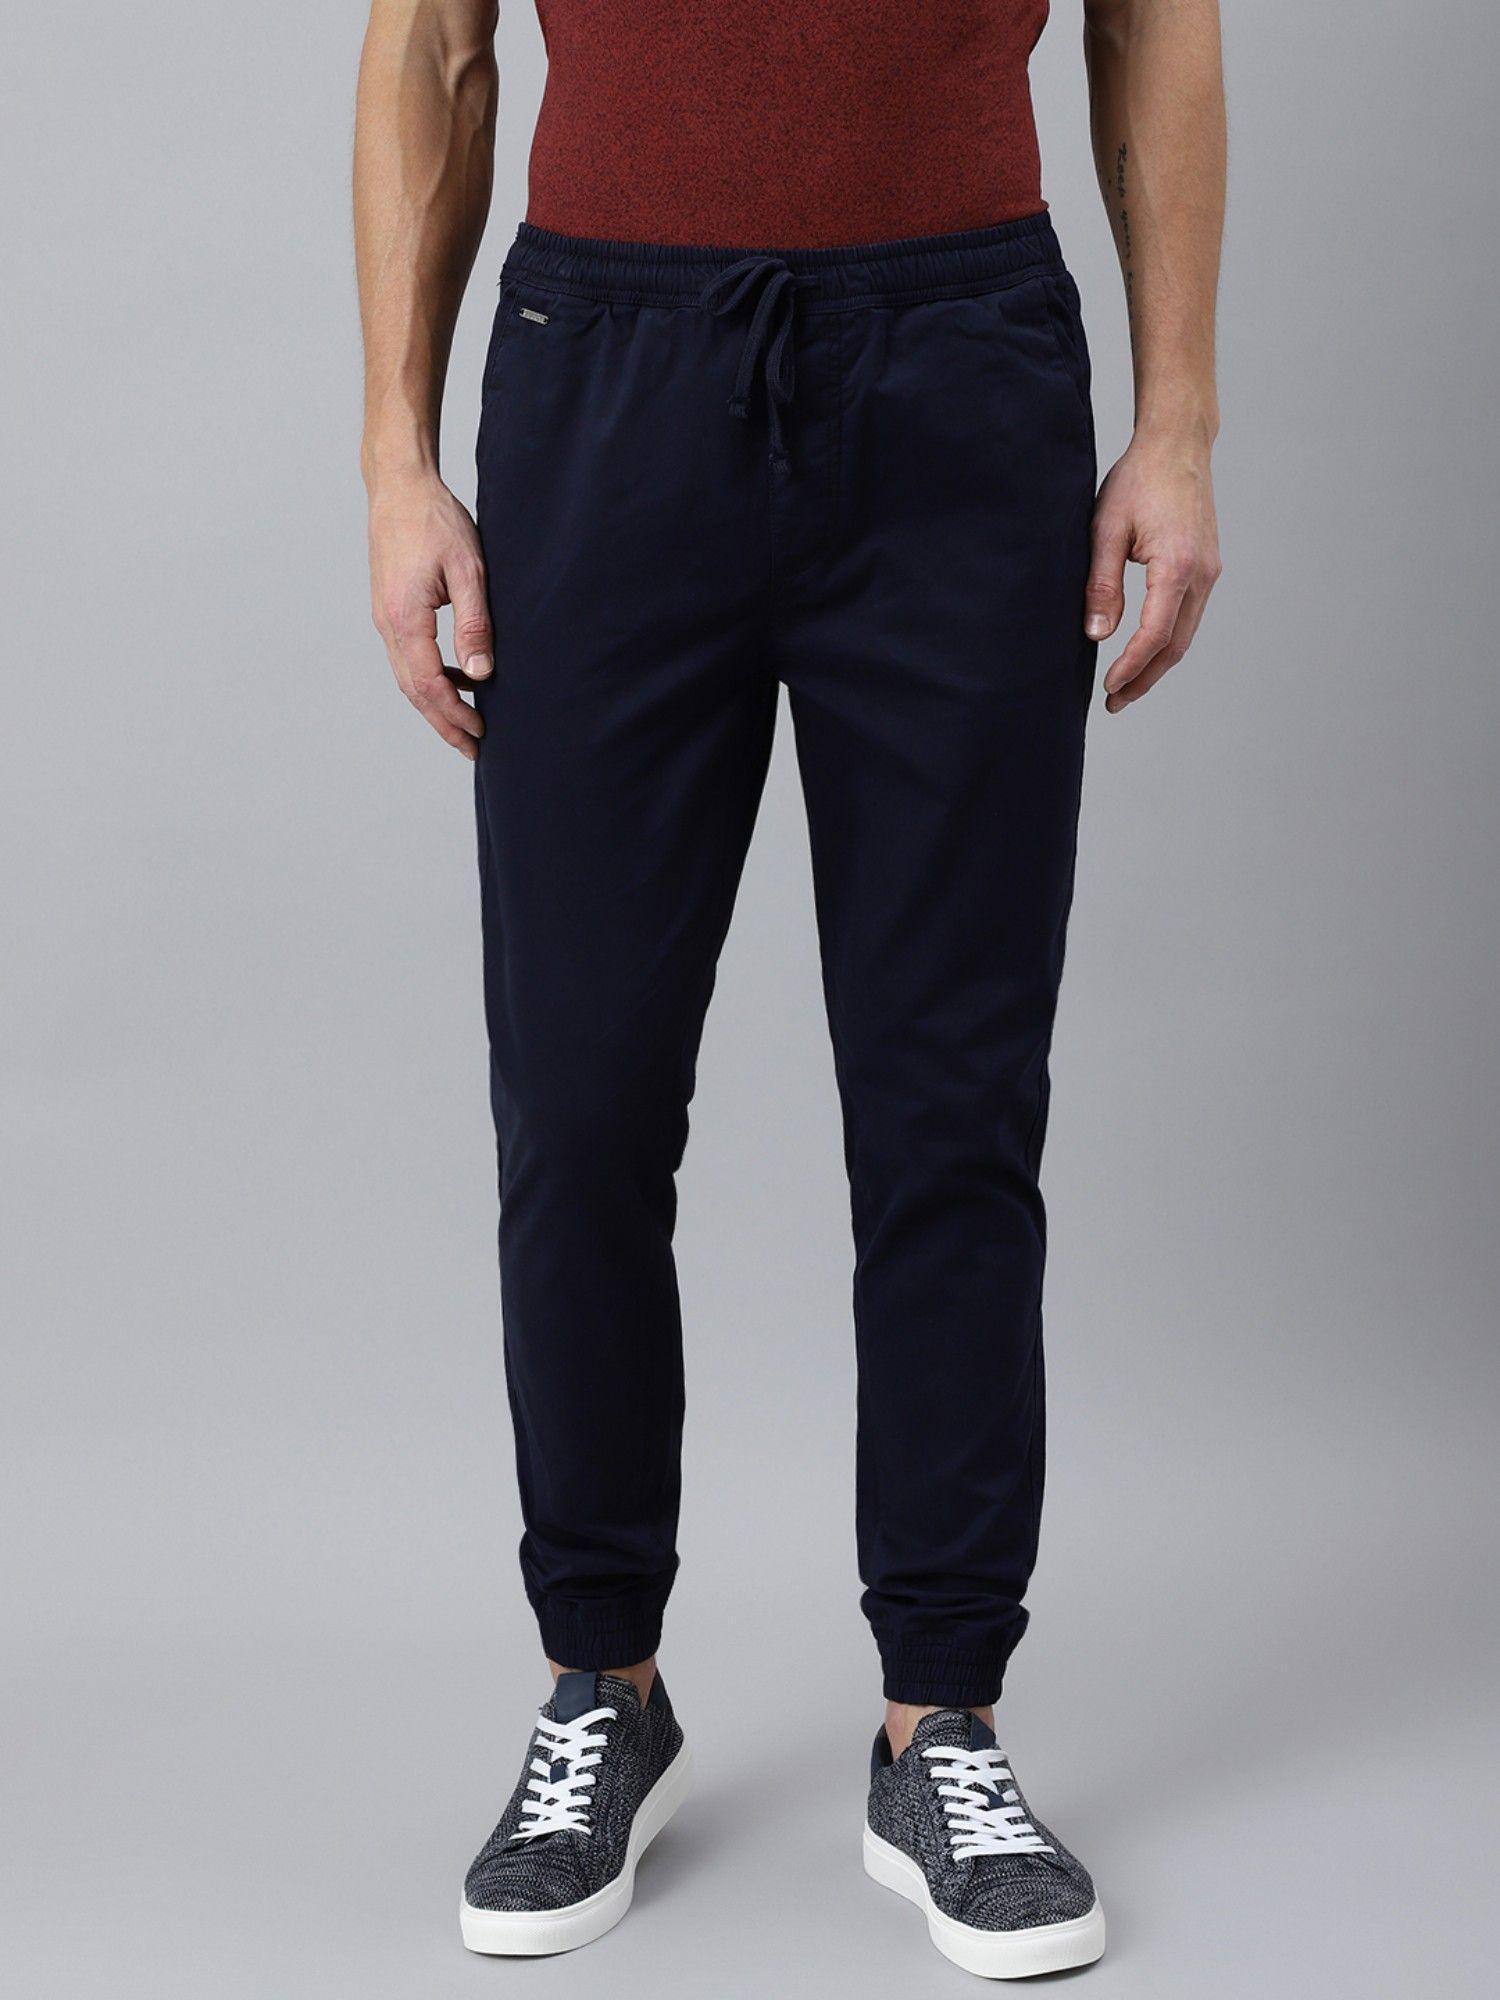 solid navy blue joggers